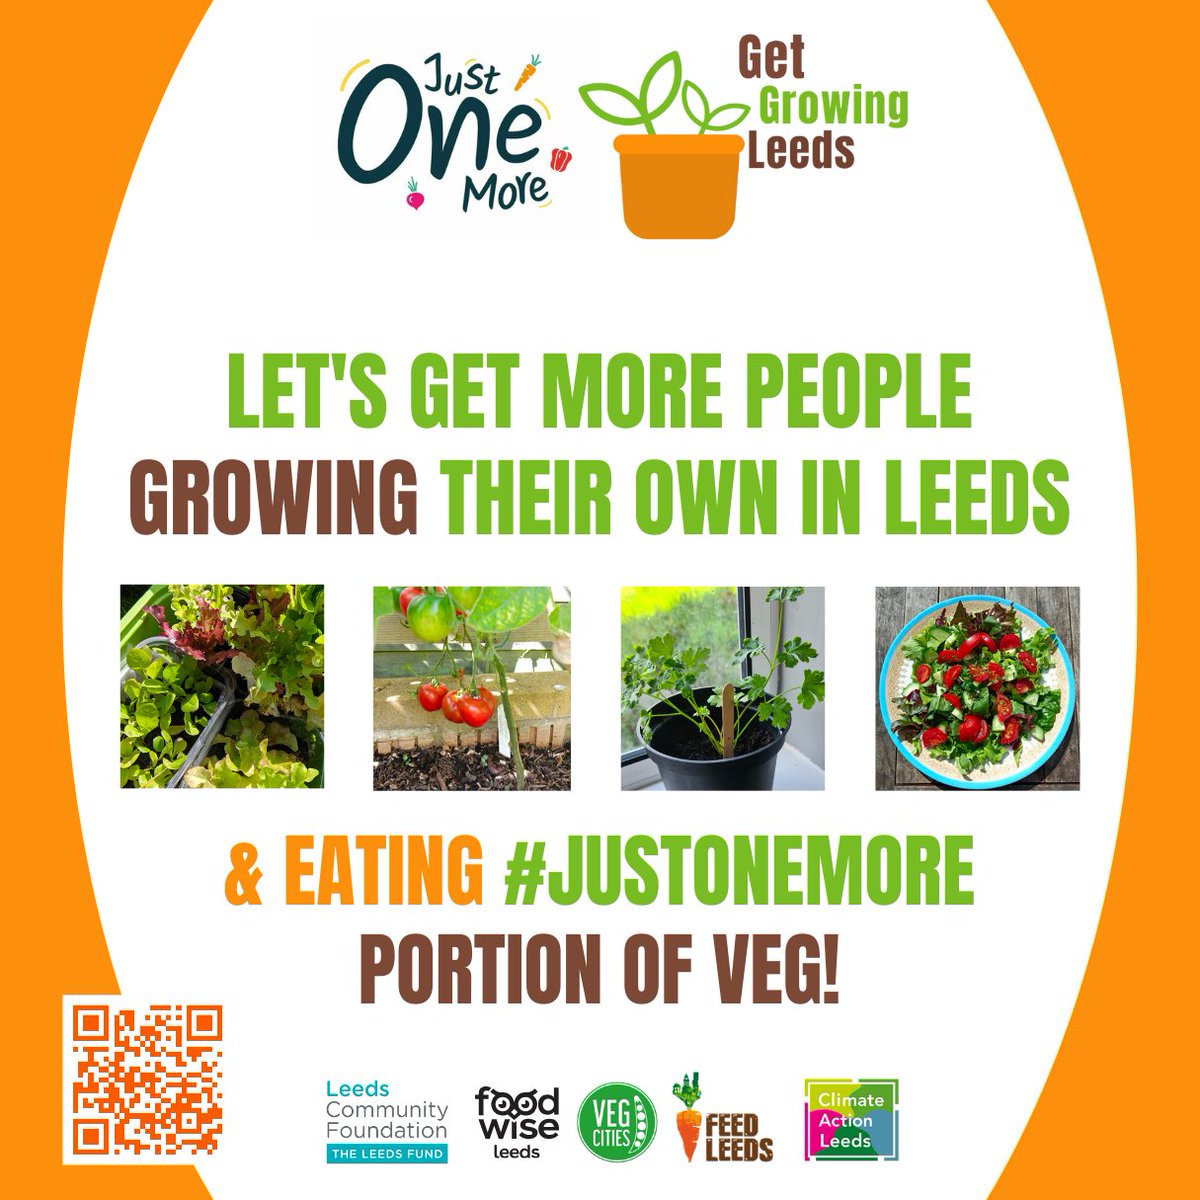 Let's get more people growing their own veg in leeds. and Eating just one more portion of veg as part of the #JustOneMore campaign. #GetGrowingLeeds